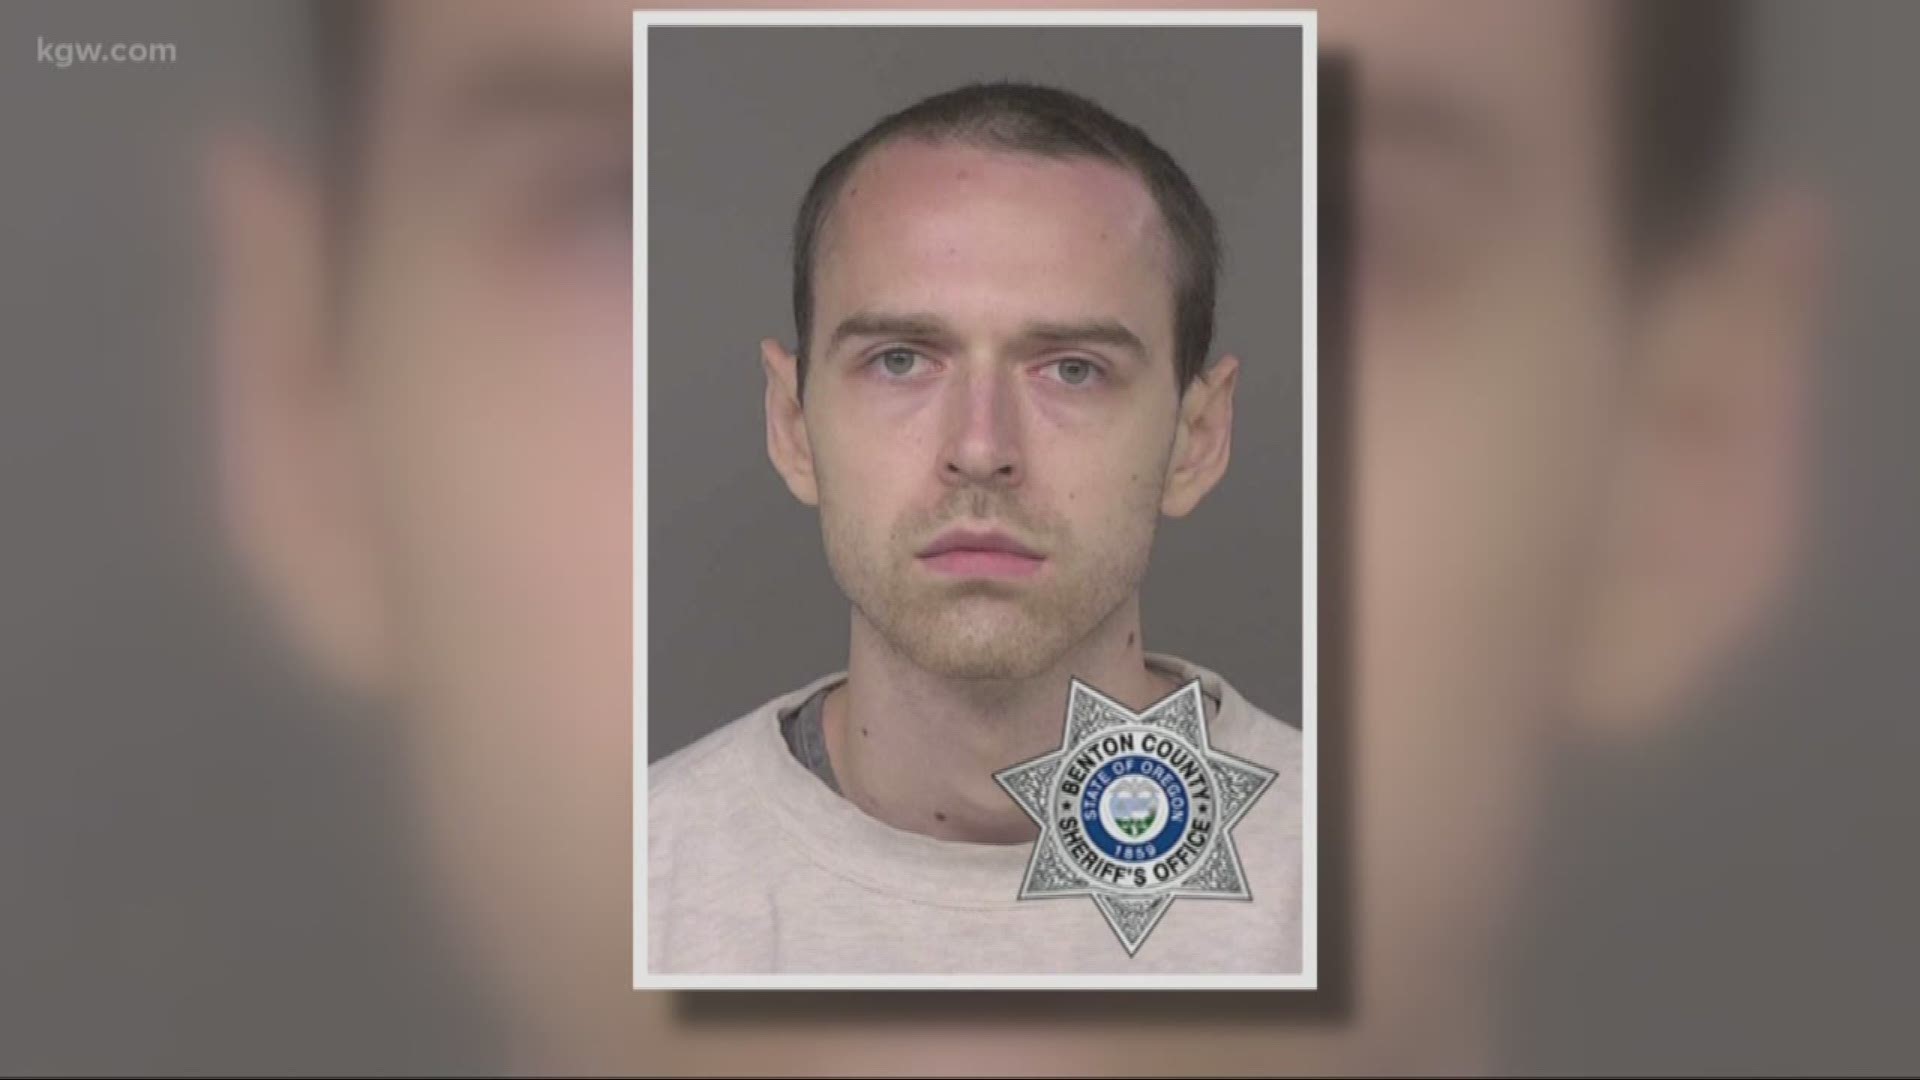 A man was arrested for firing a shot inside a Corvallis Foster Farms plant.